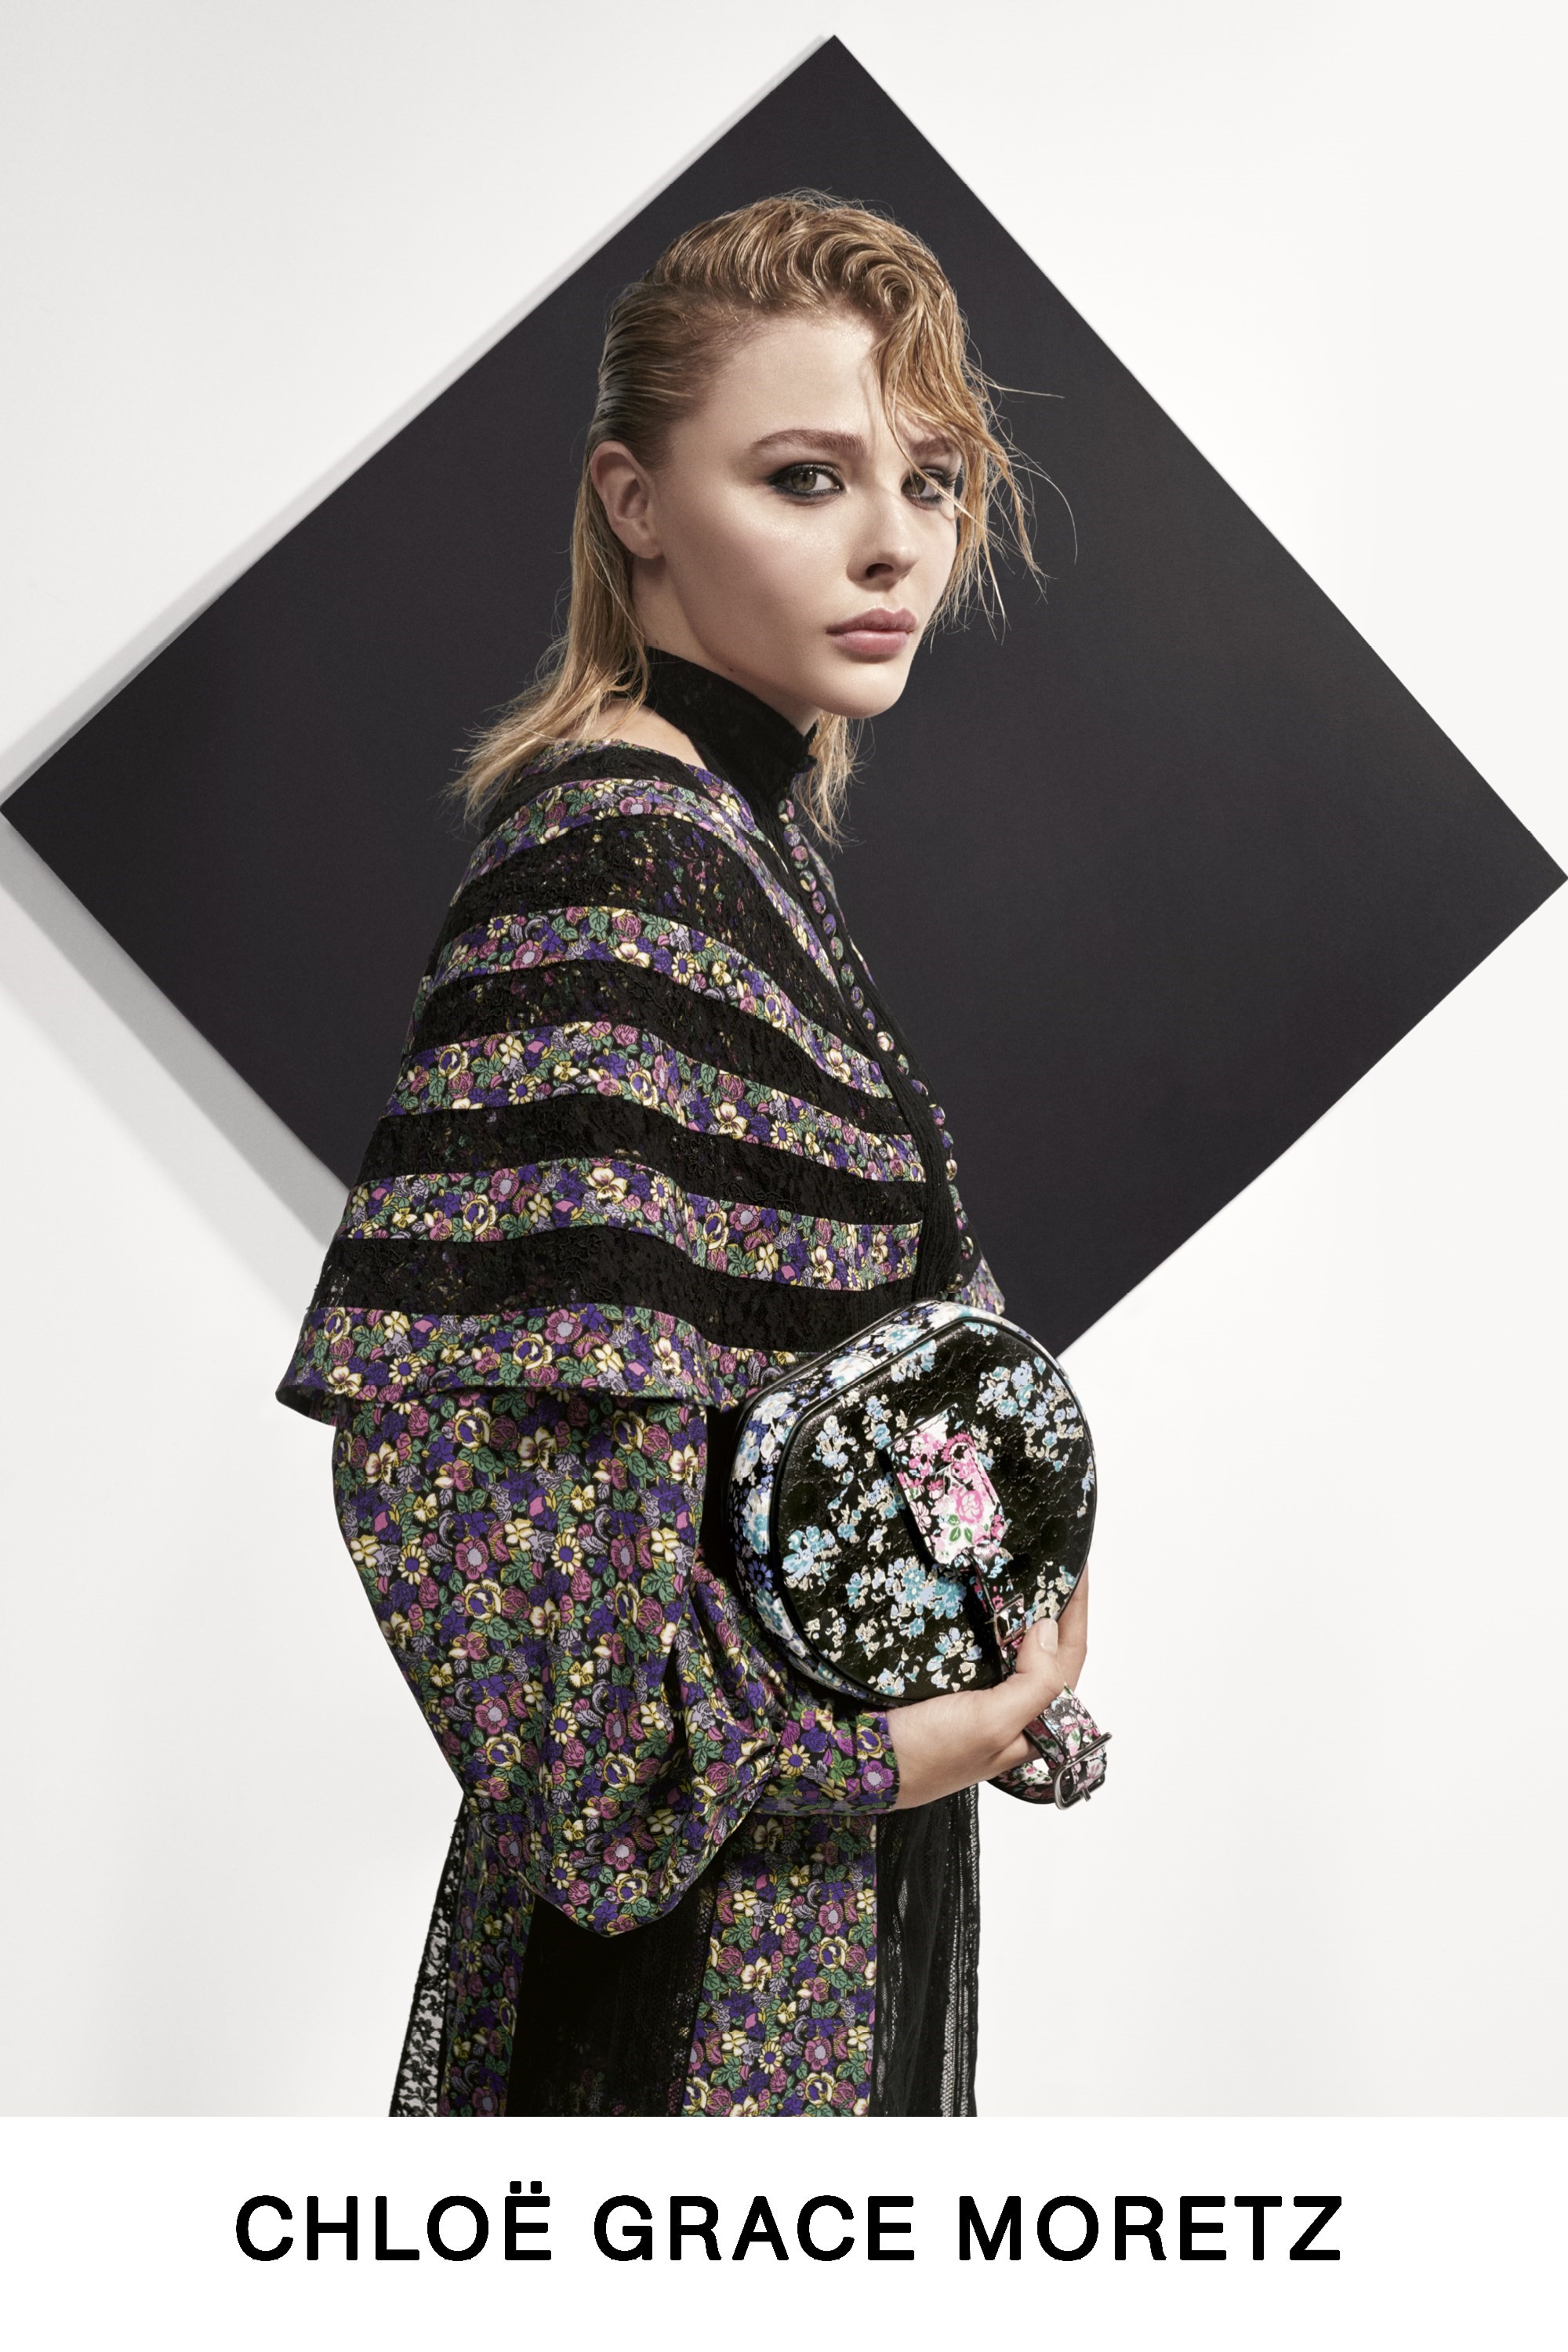 See Louis Vuitton's New Visuals, Starring Chloë Grace Moretz and Kelela